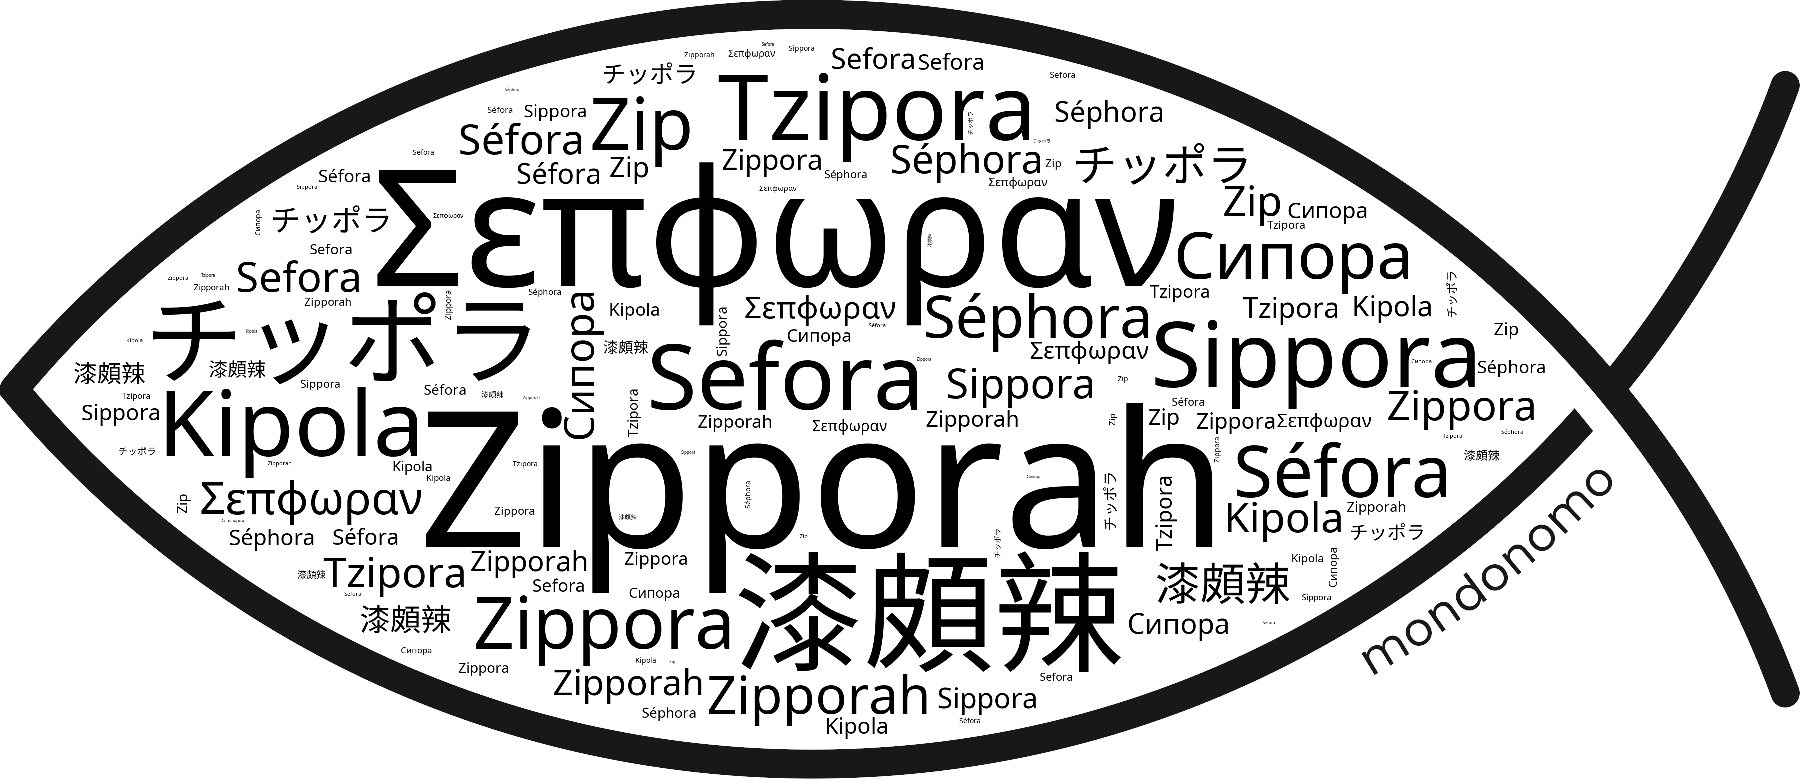 Name Zipporah in the world's Bibles